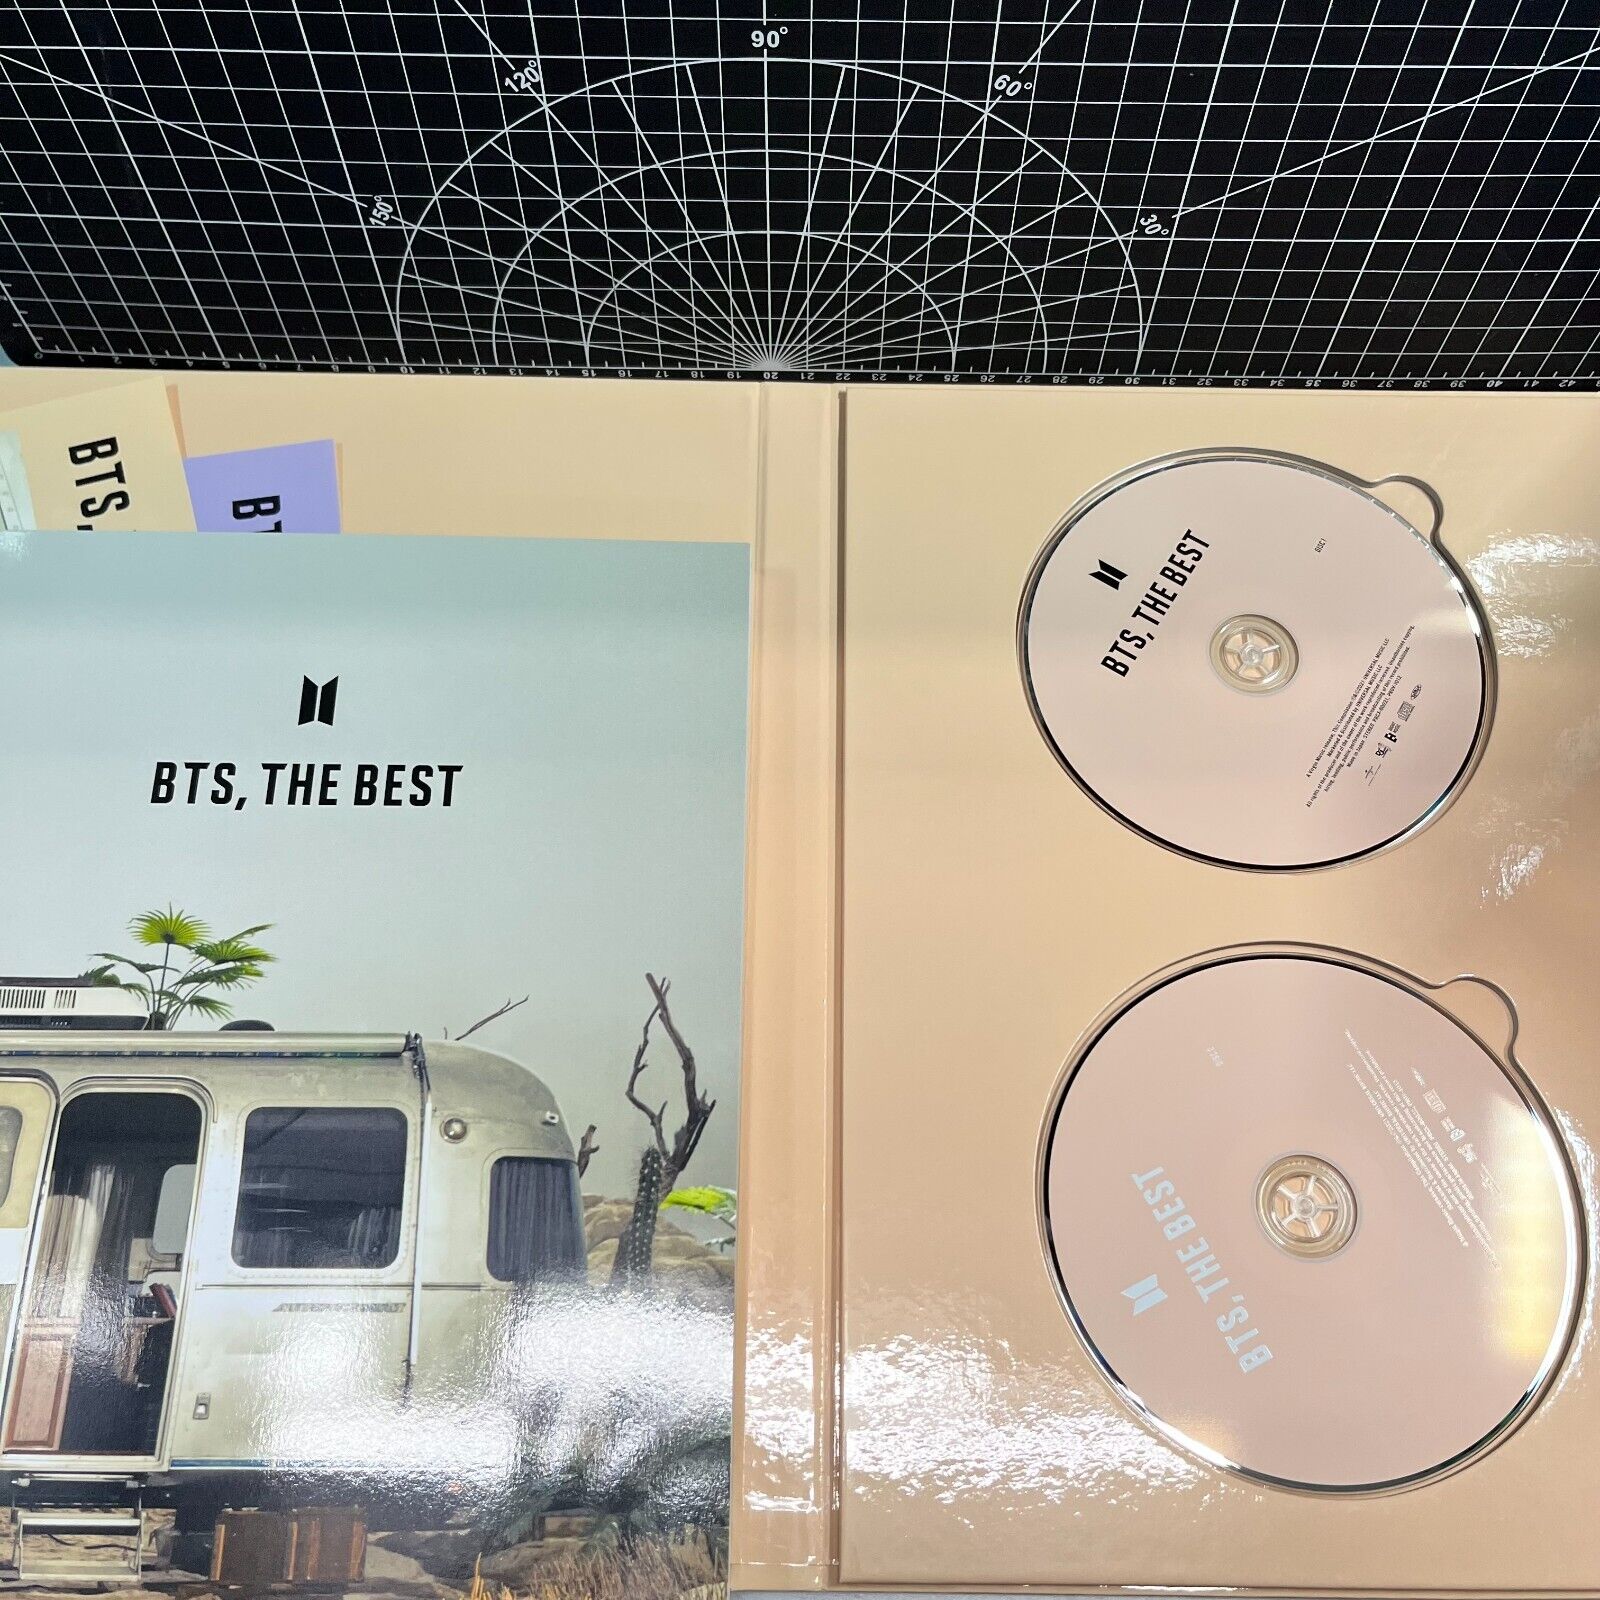 BTS announce Japanese album, BTS, THE BEST, featuring 'Film out